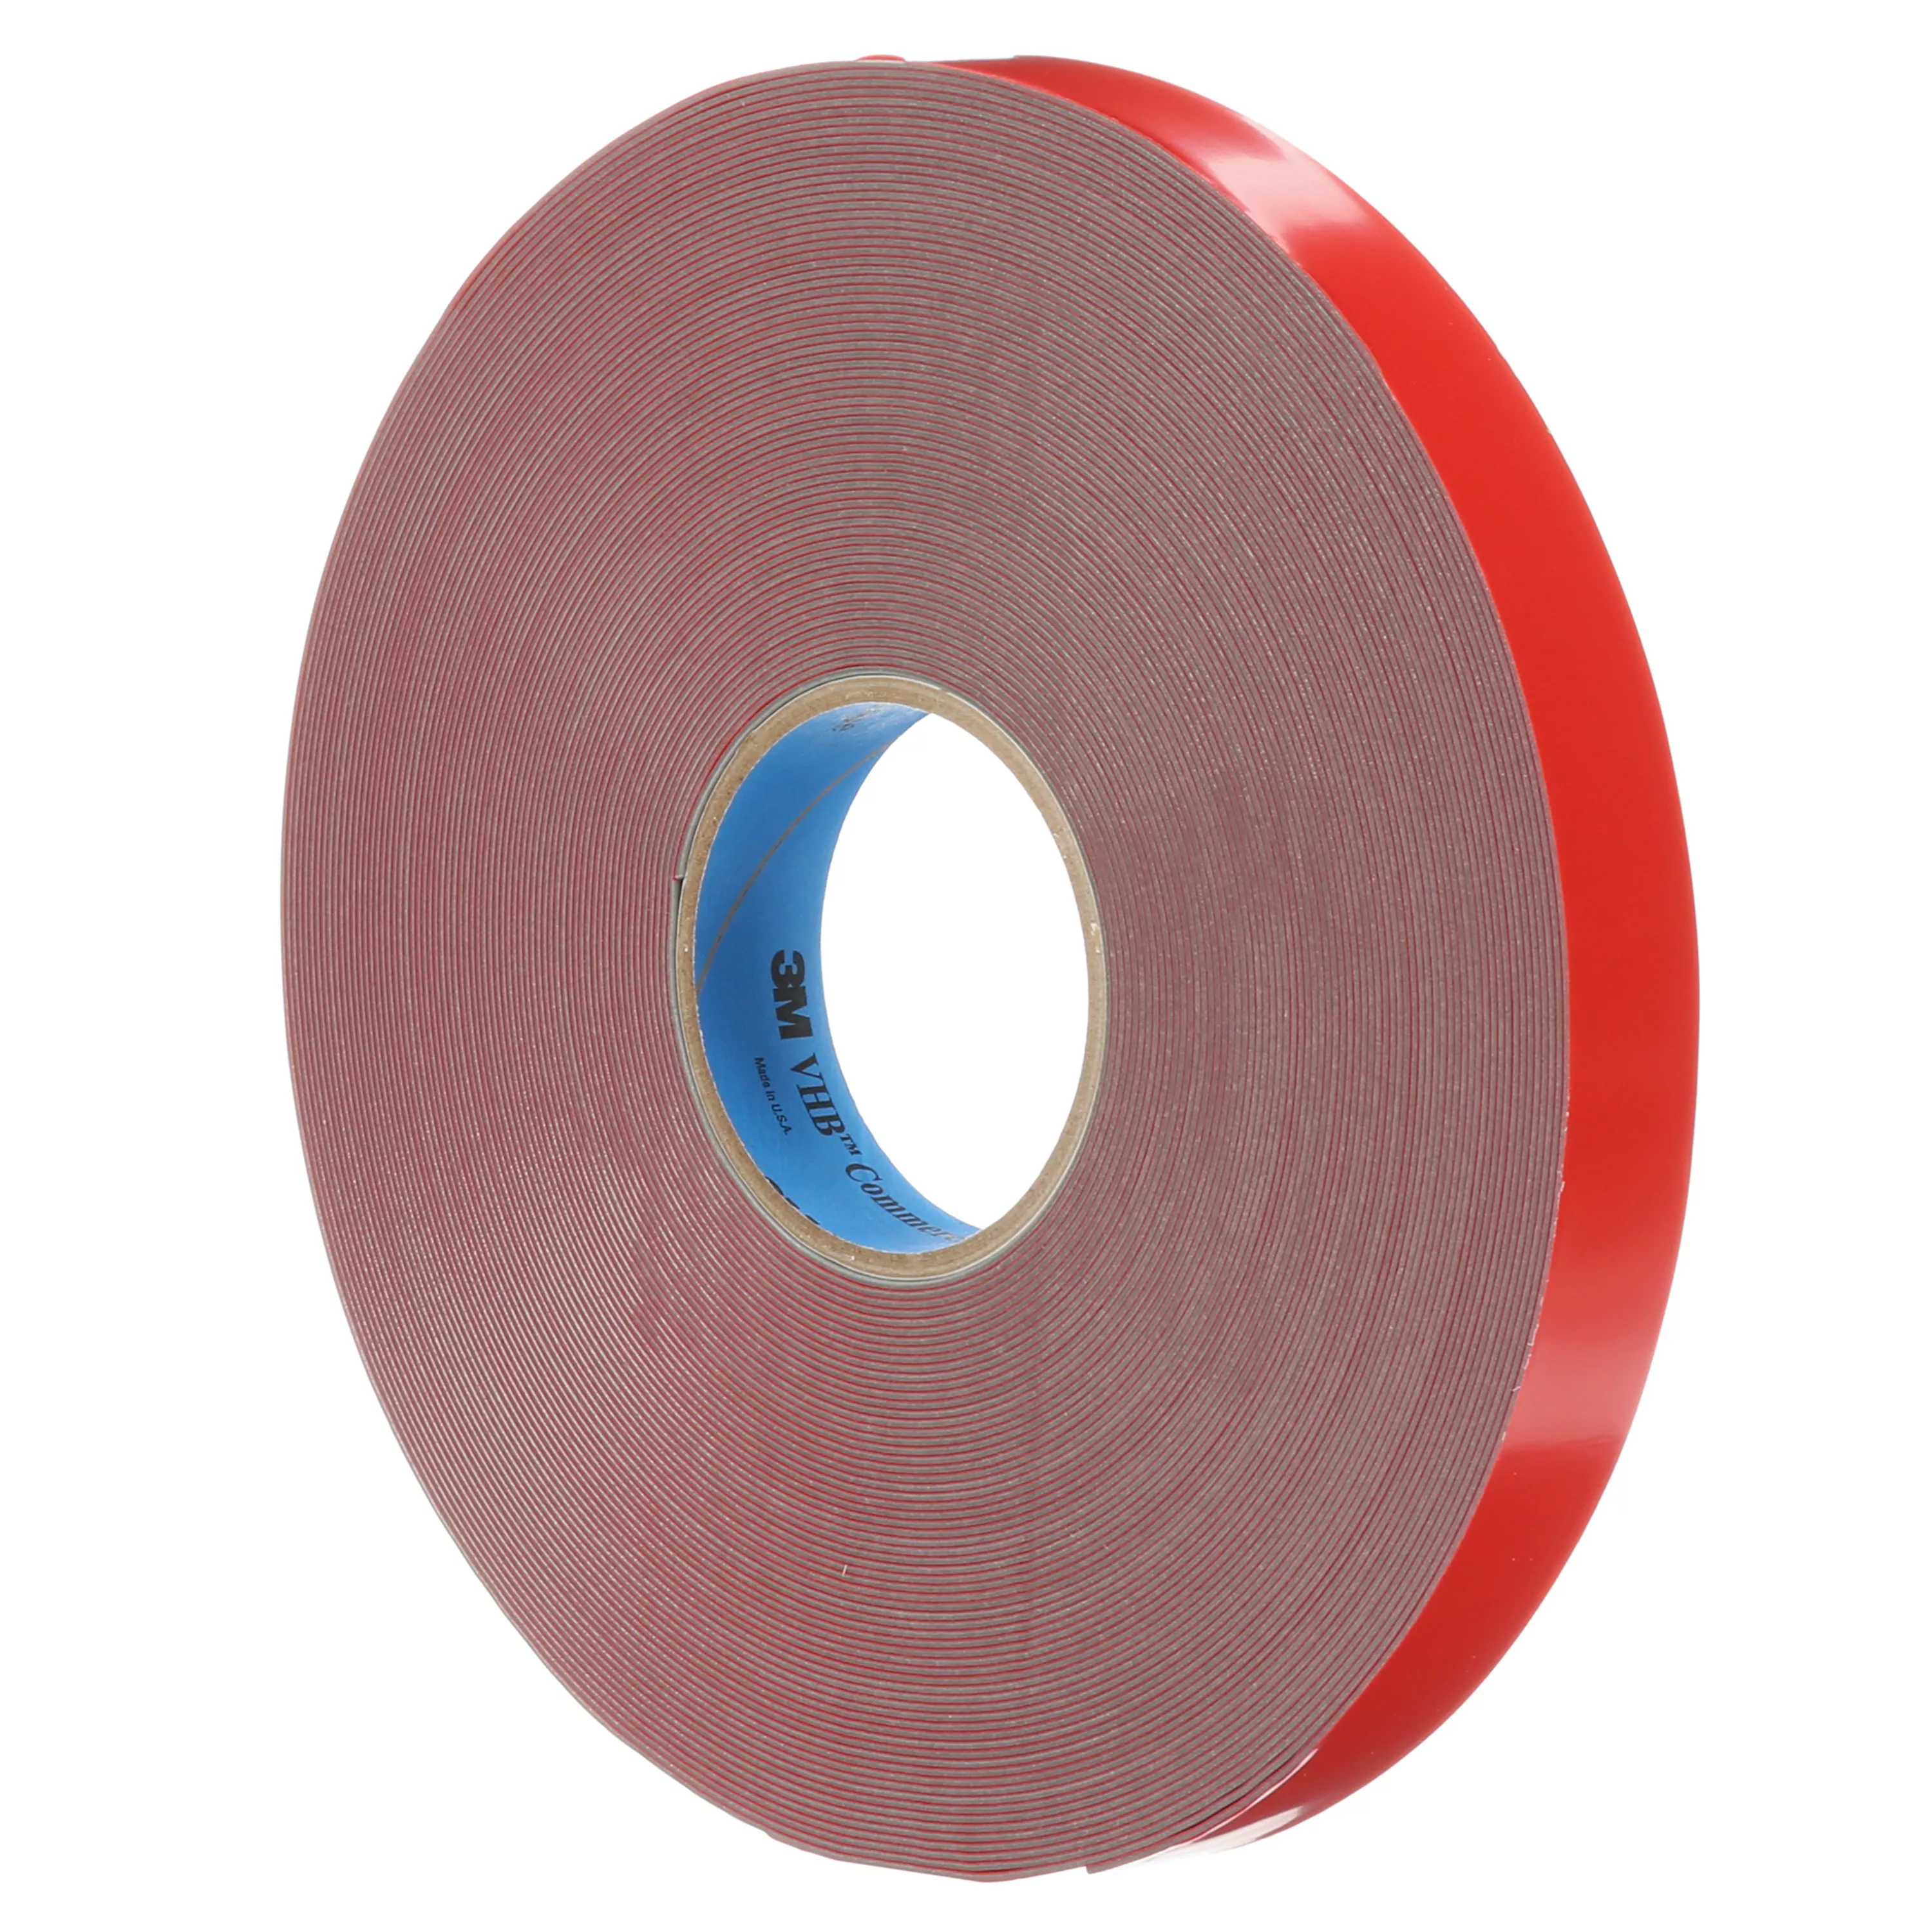 3M™ VHB™ Commercial Vehicle Tape CV45F, Gray, 1 in x 36 yd, 45 mil, Film
Liner, 9 Roll/Case, Restricted